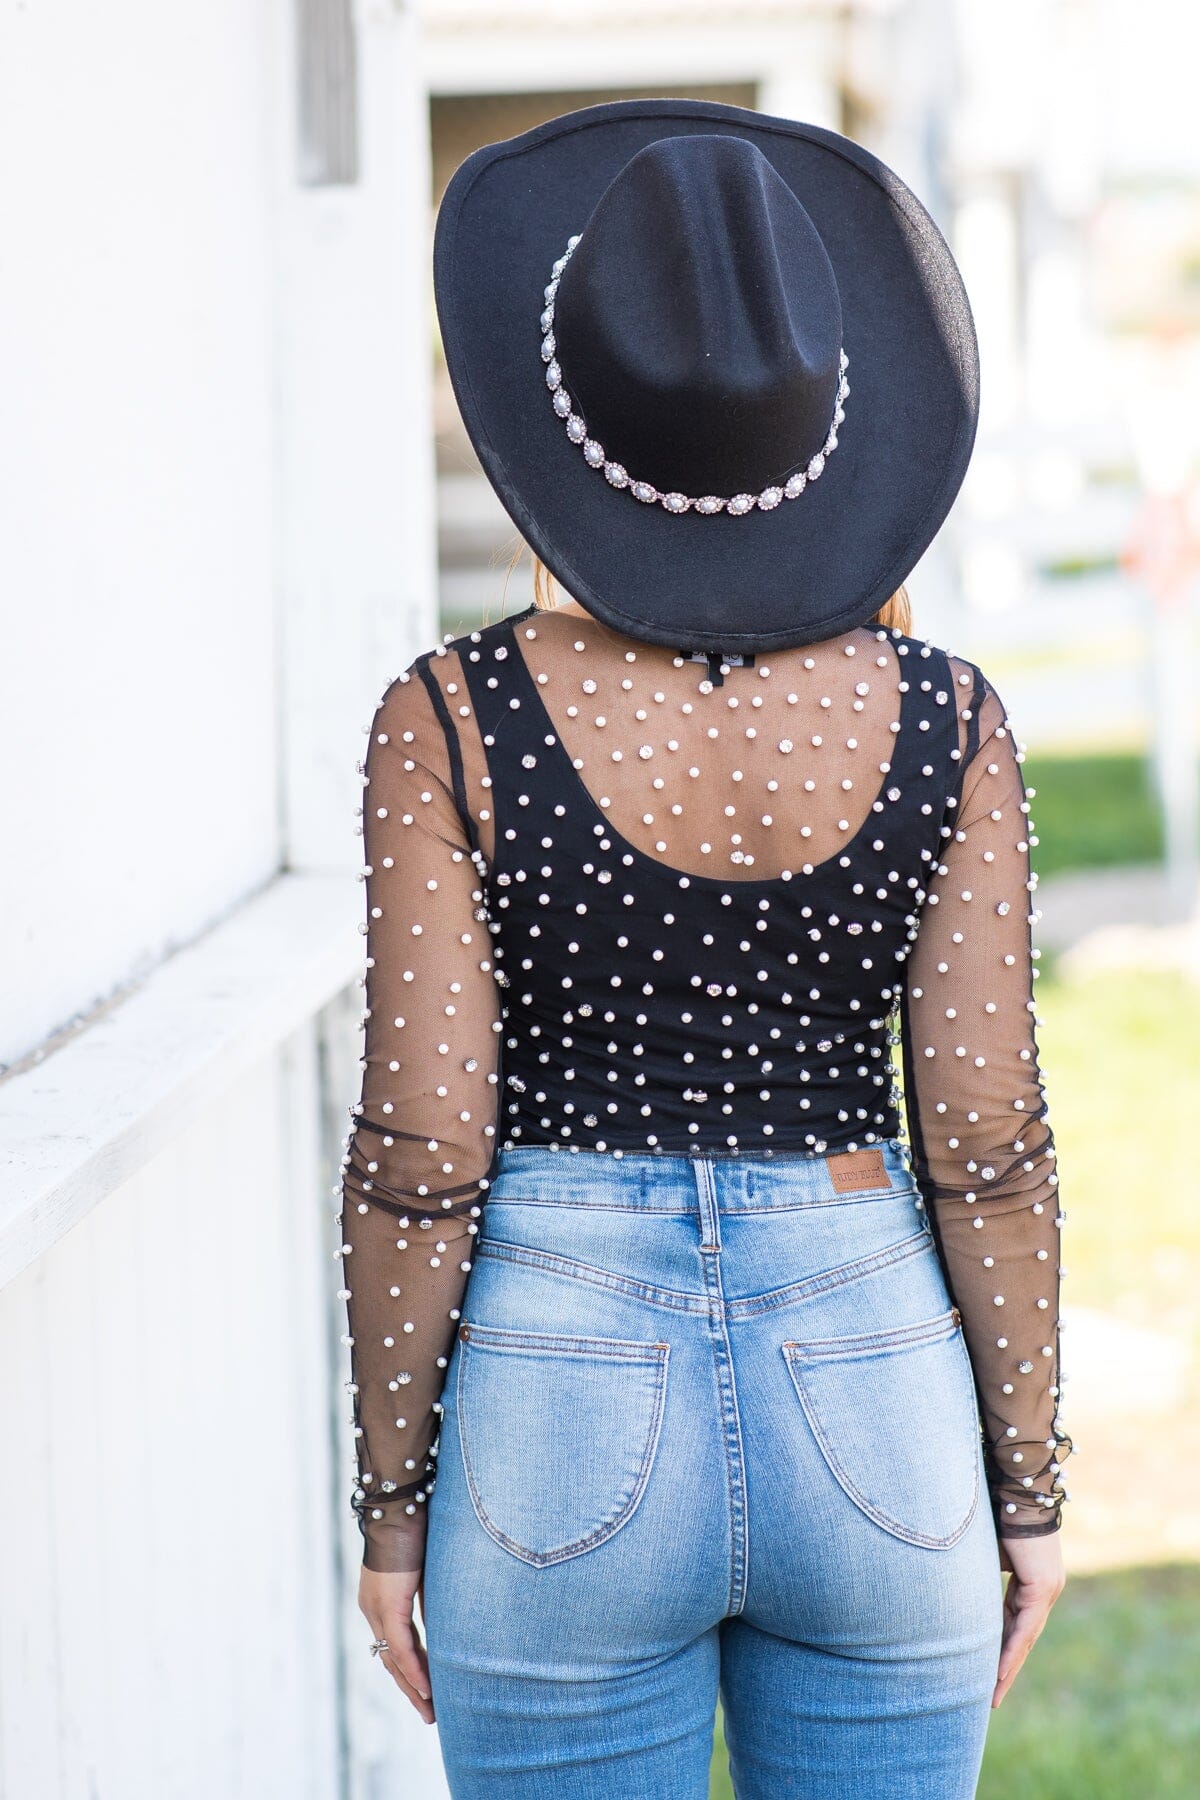 Black Rhinestone and Pearls Long Sleeve Top - Filly Flair